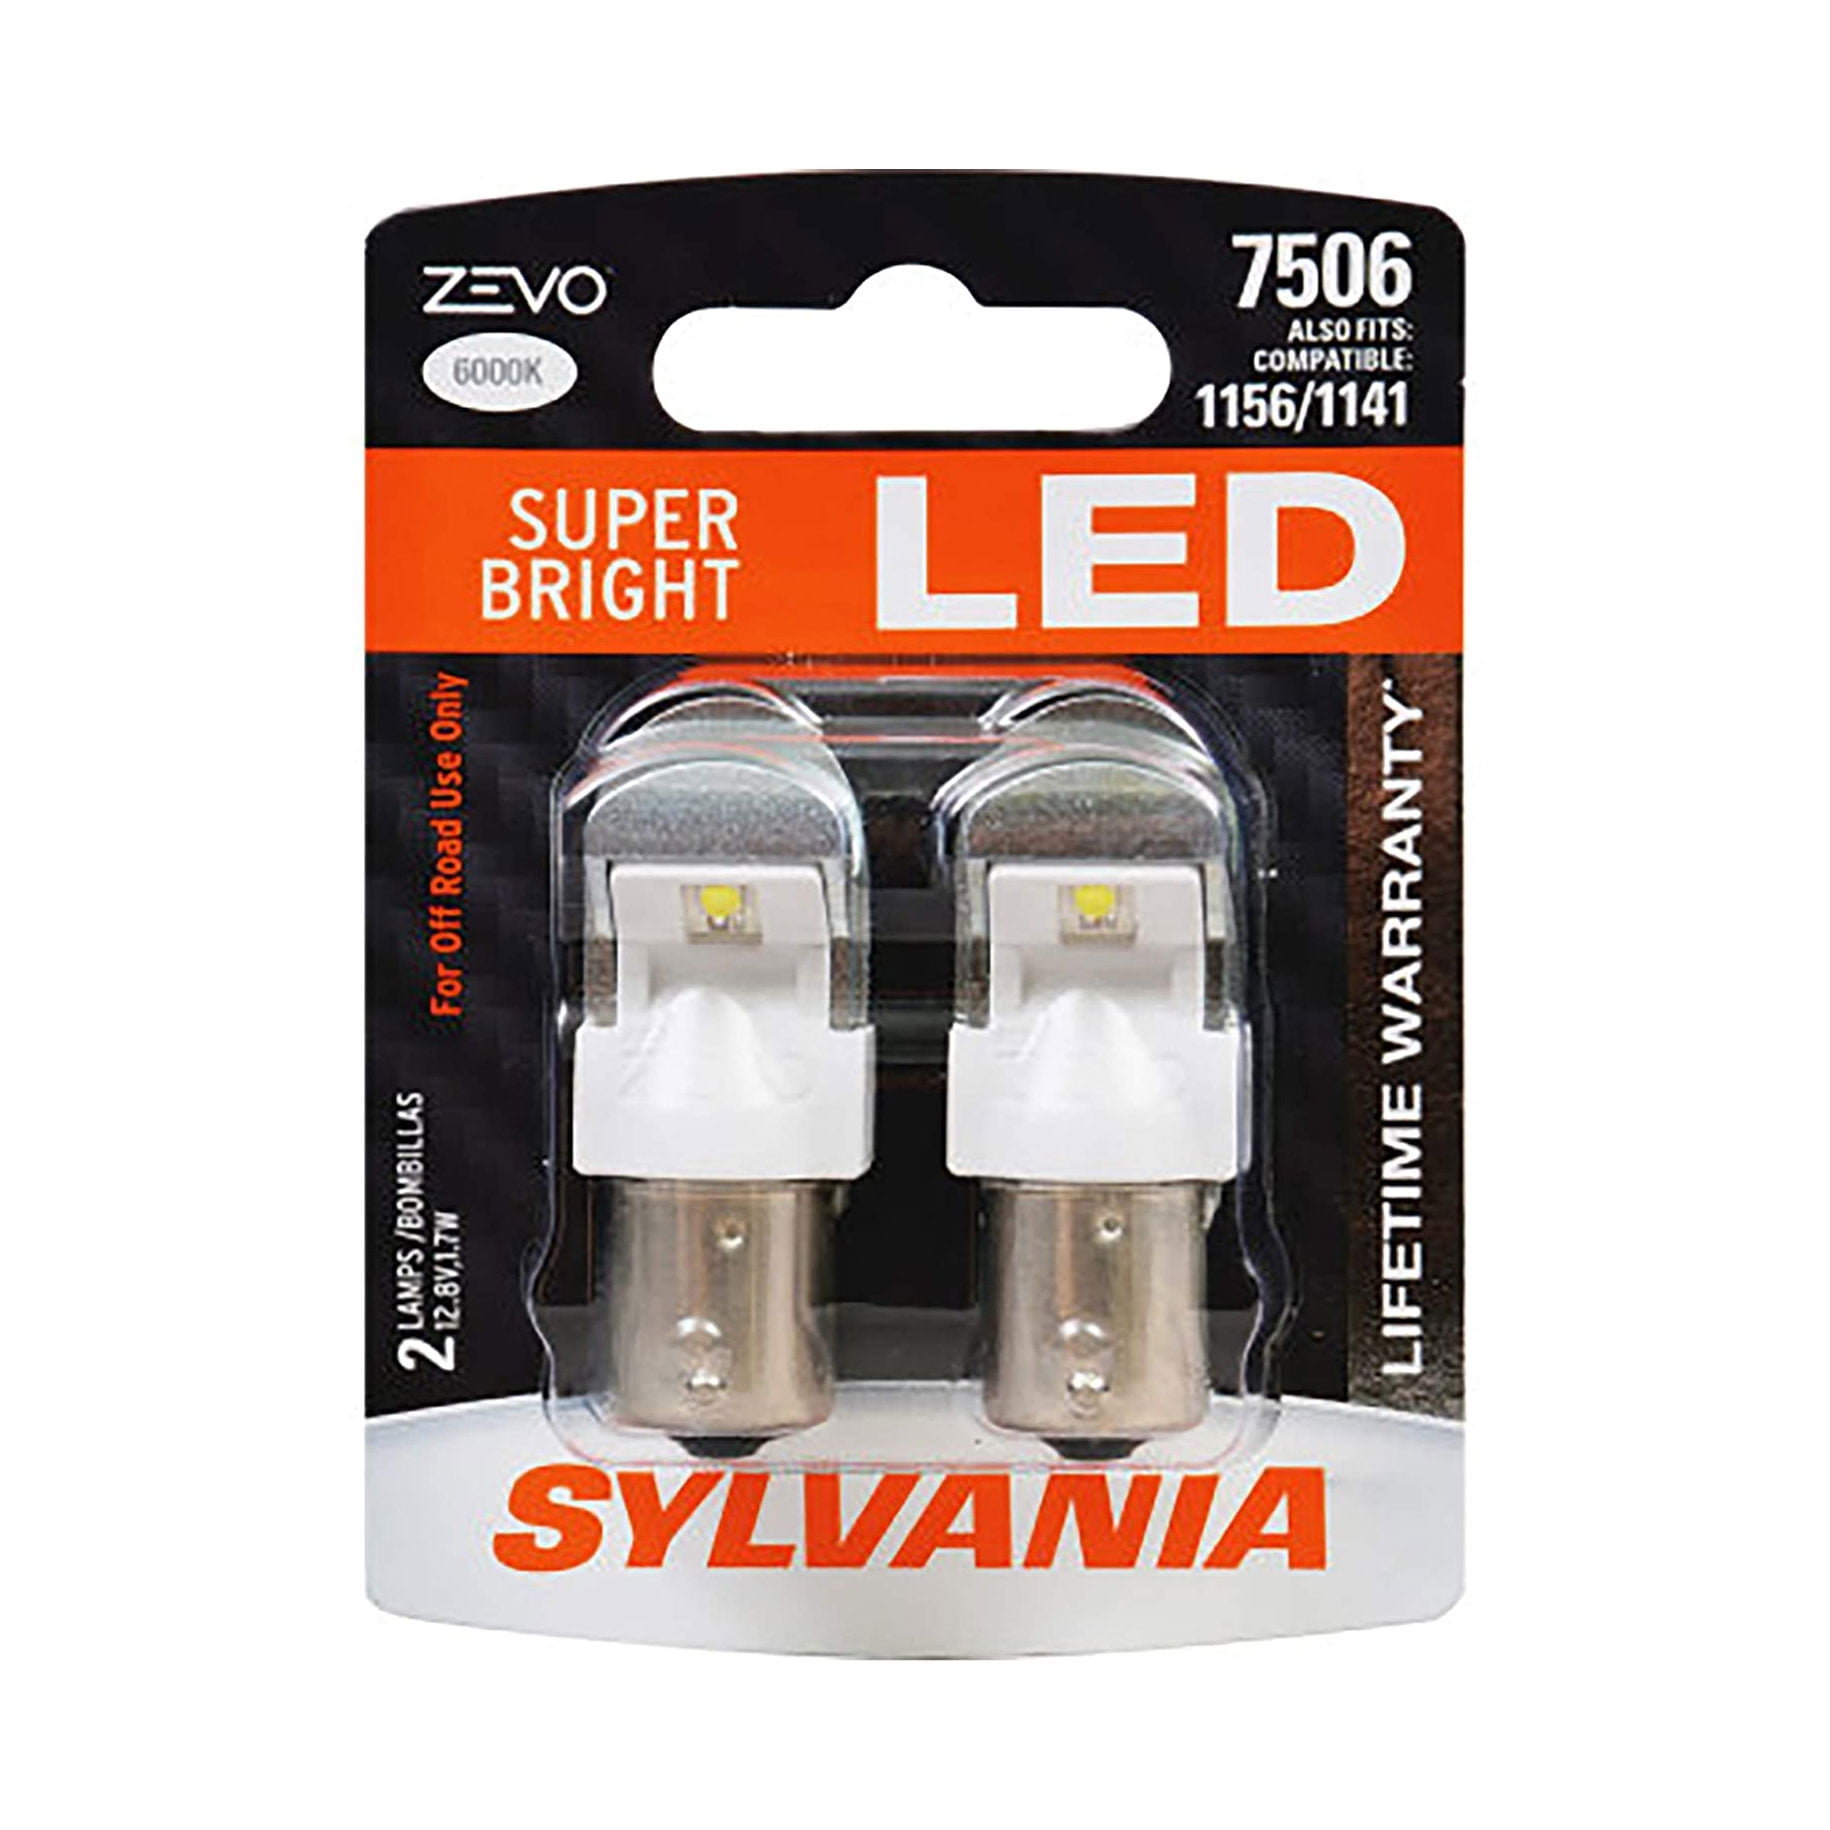 SYLVANIA - 1156 LED White Mini Bulb - Bright LED Bulbs, Ideal for Back Up,  Daytime Running Light (DRL) and More. (Contains 2 Bulbs)